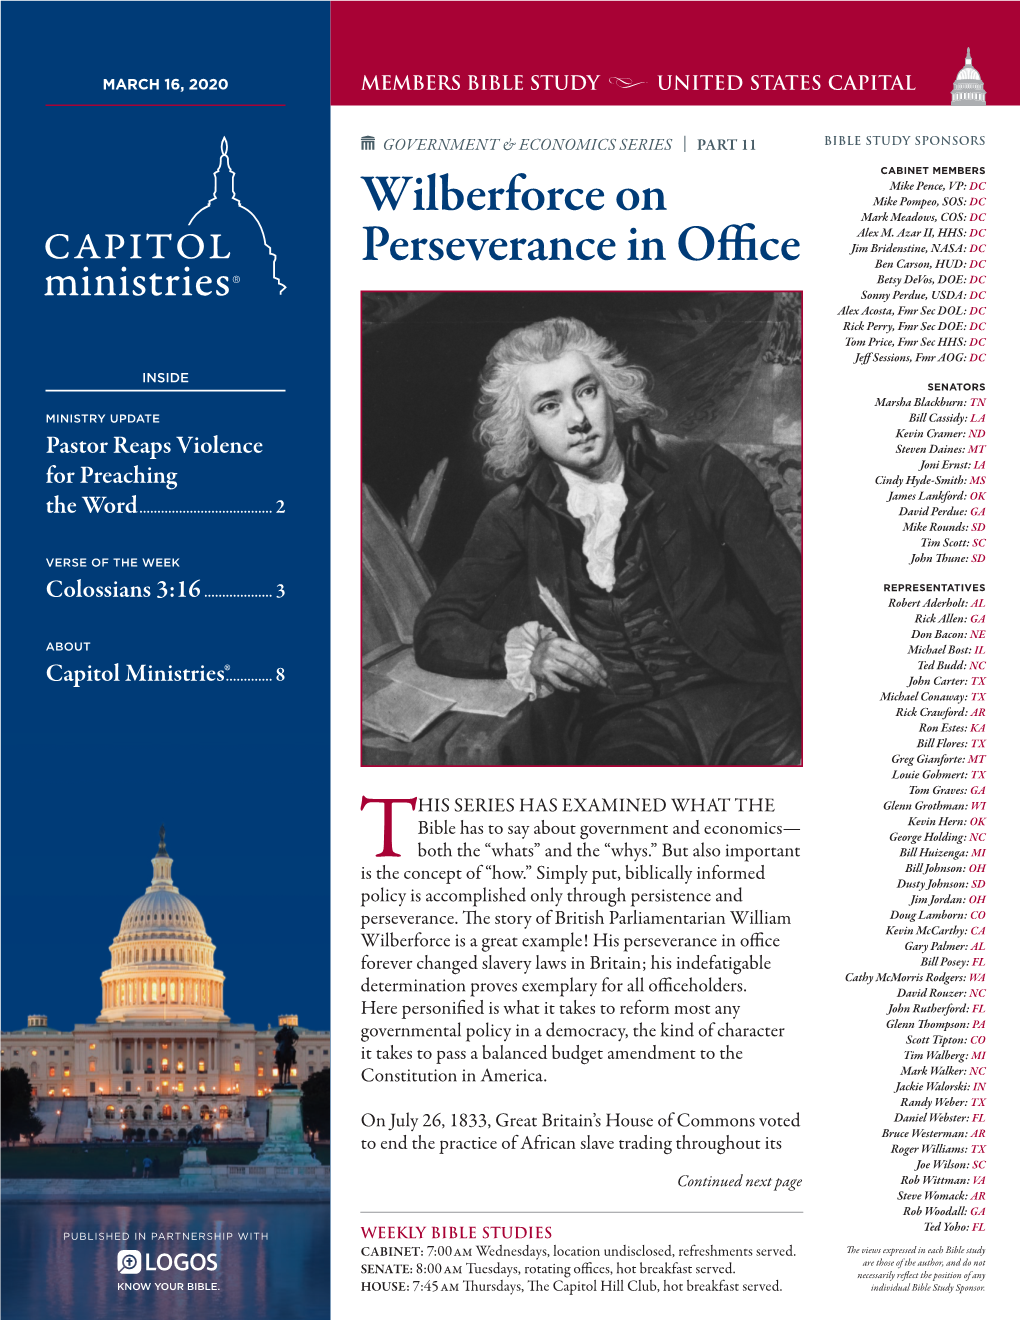 Wilberforce on Perserverence in Office